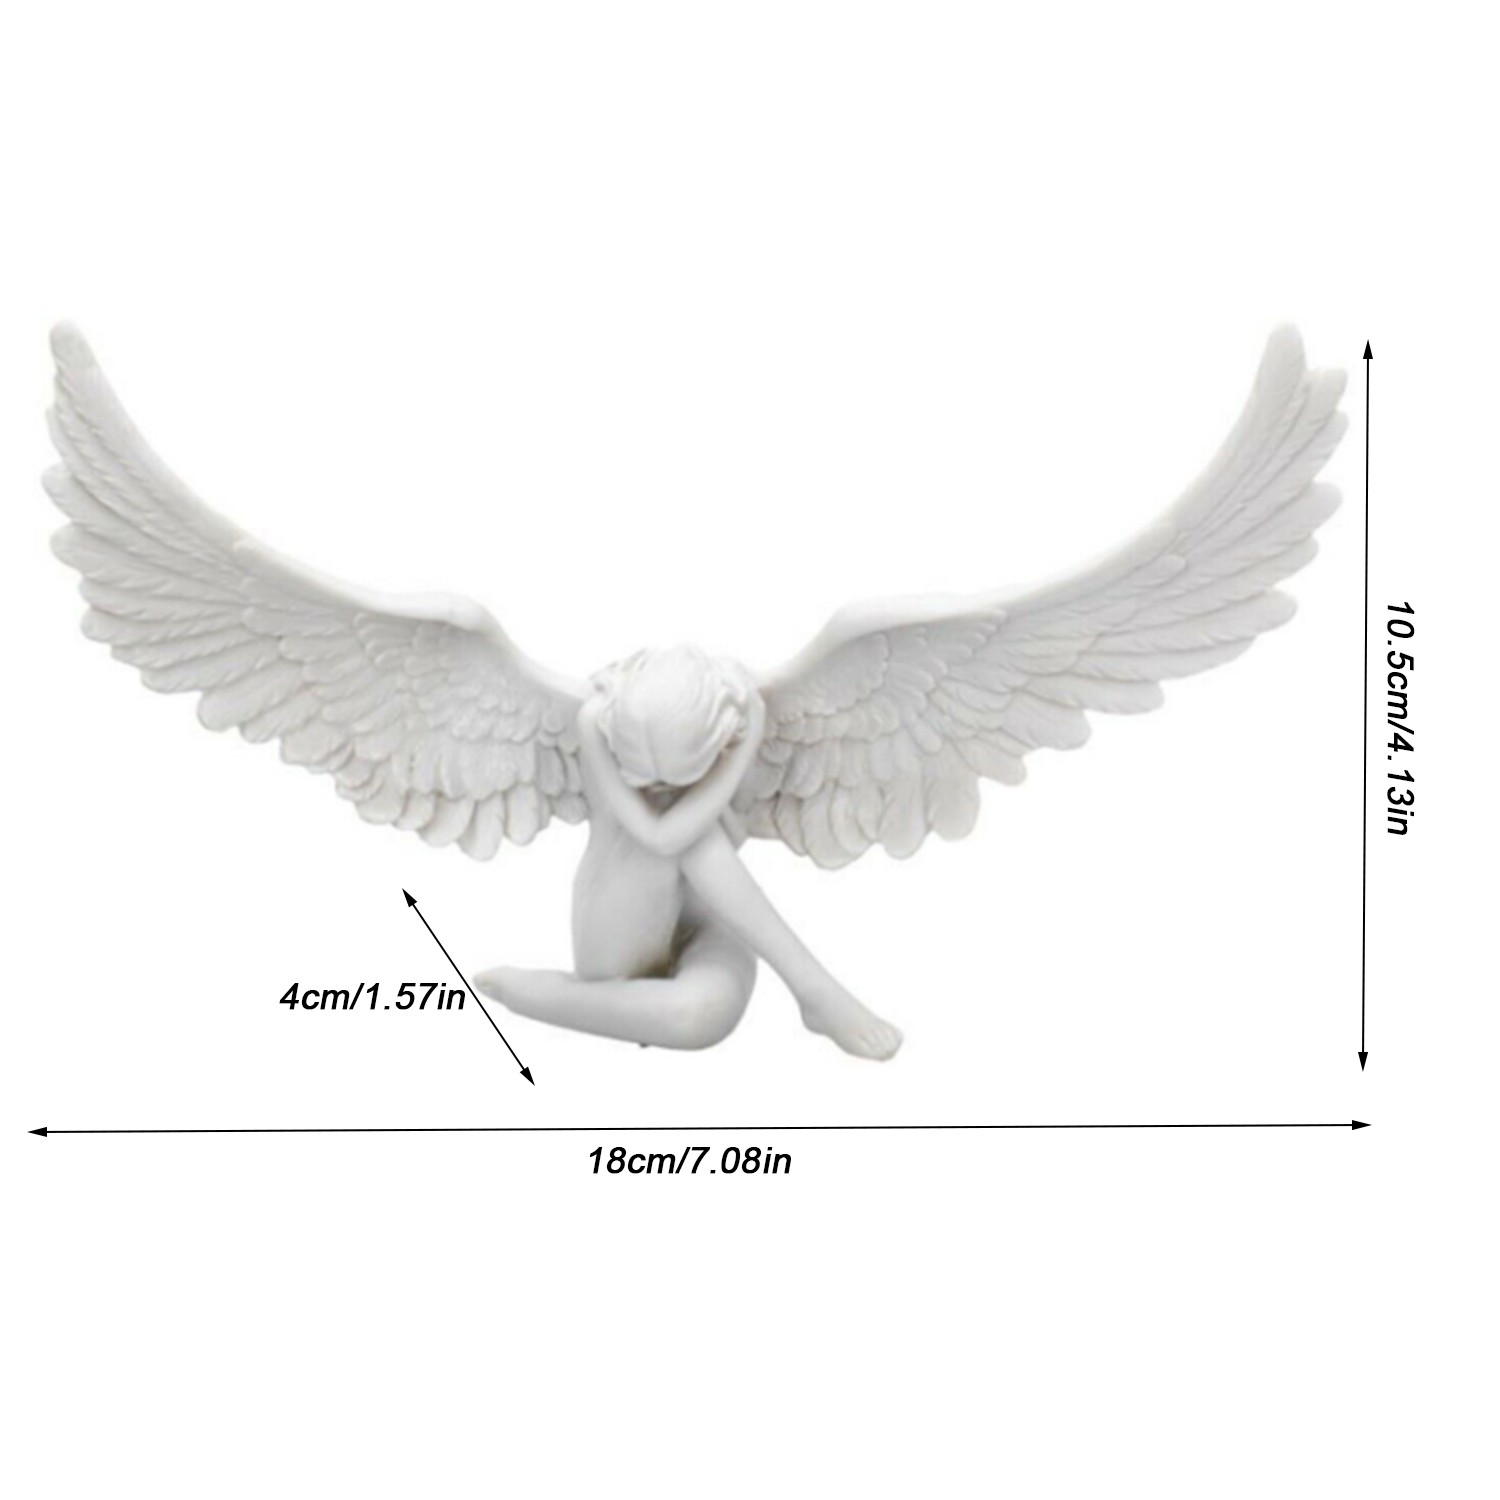 ❤LANSEL❤ Desk Redemption Decorative Statue Resin Angel Statue Yard Lawn Patio with Open Wings Ornaments Home Gardening Decoration Angel Sculpture